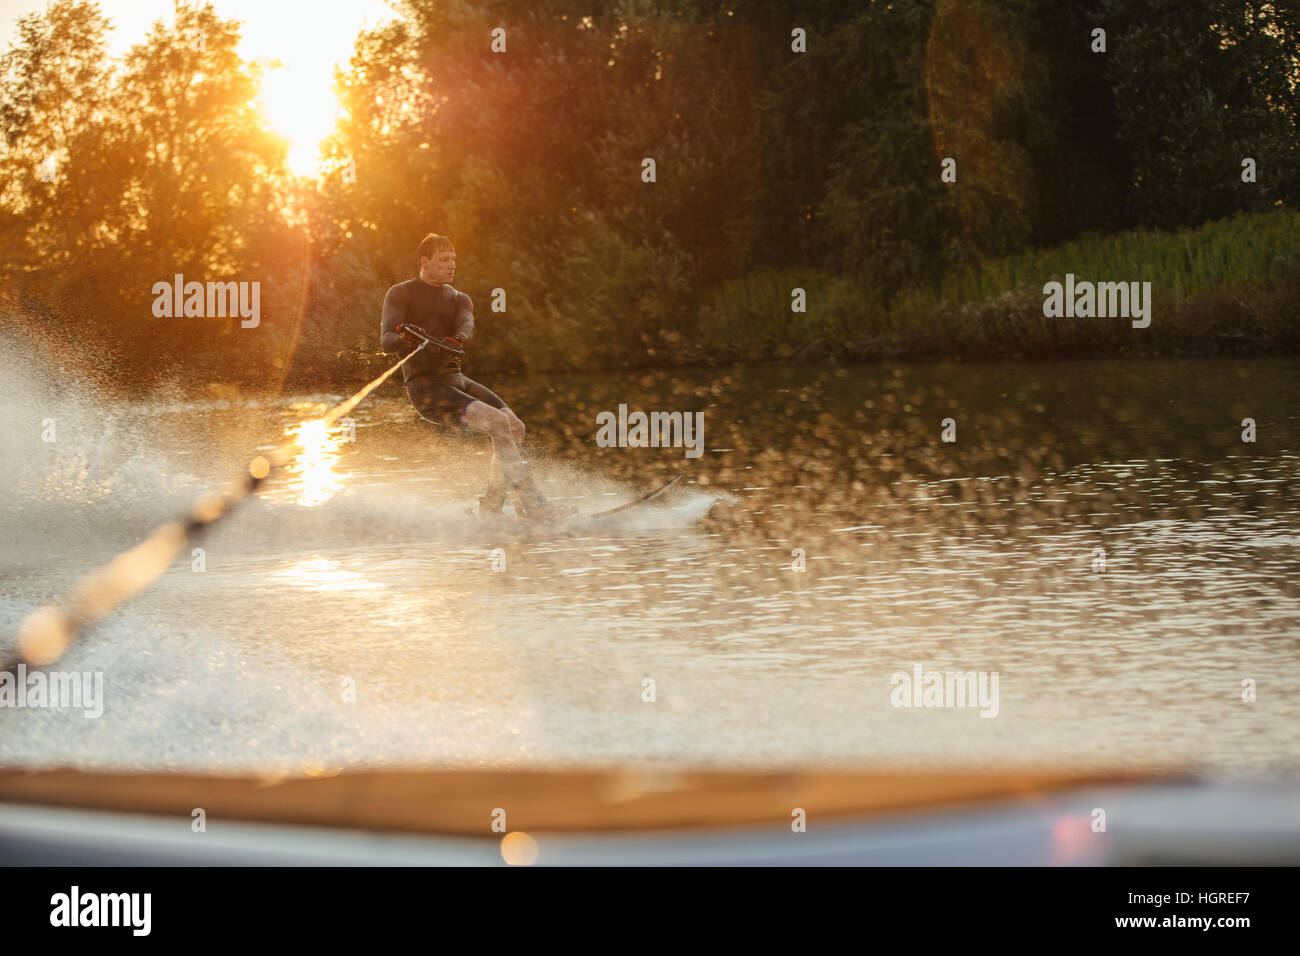 Man riding wakeboard on wave of motorboat in lake at sunset. Male athlete in action, water skiing on lake. Stock Photo